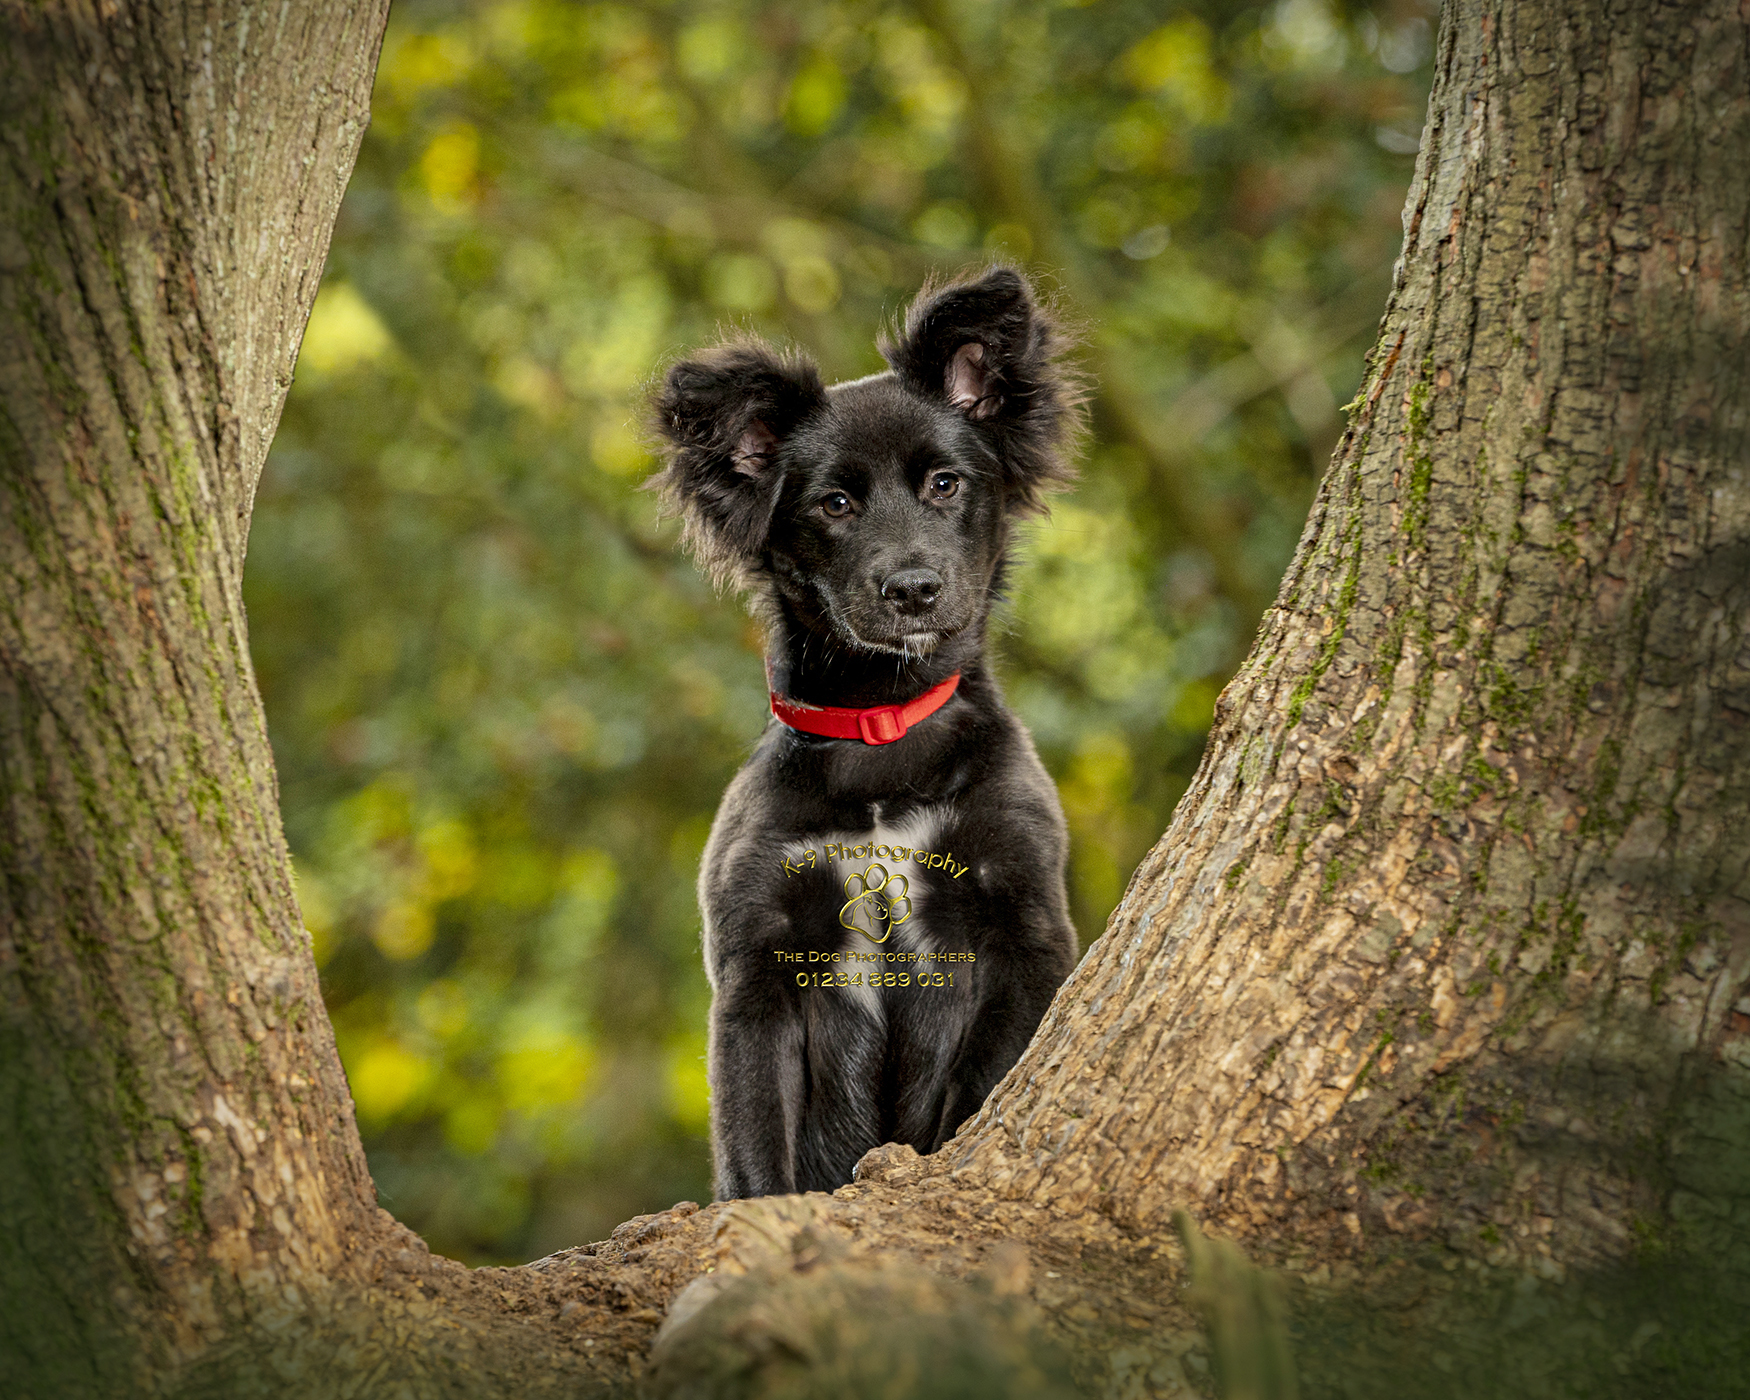 Improve your dog photography skills with these expert tips